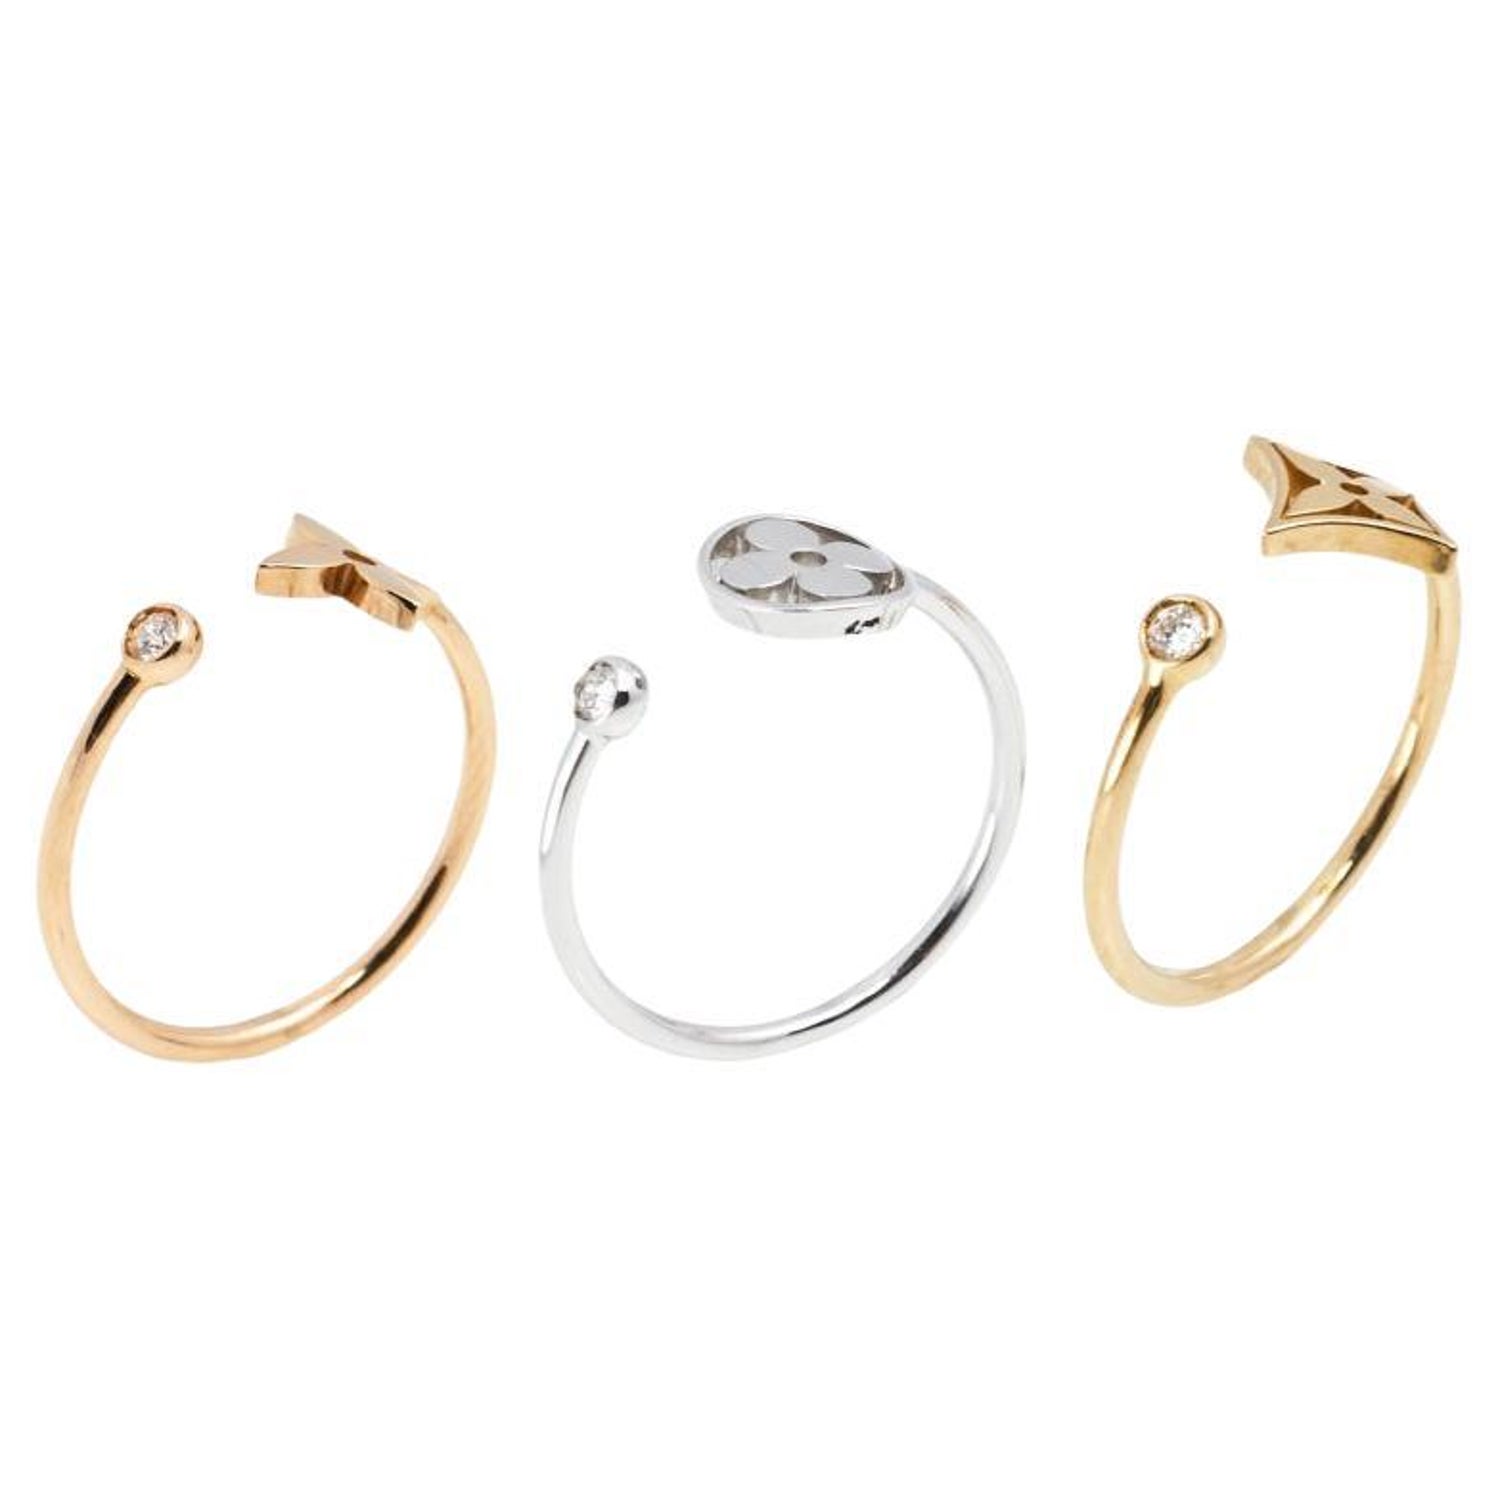 Sold at Auction: Louis Vuitton IDYLLE BLOSSOM XL DOUBLE RING, 3 GOLDS